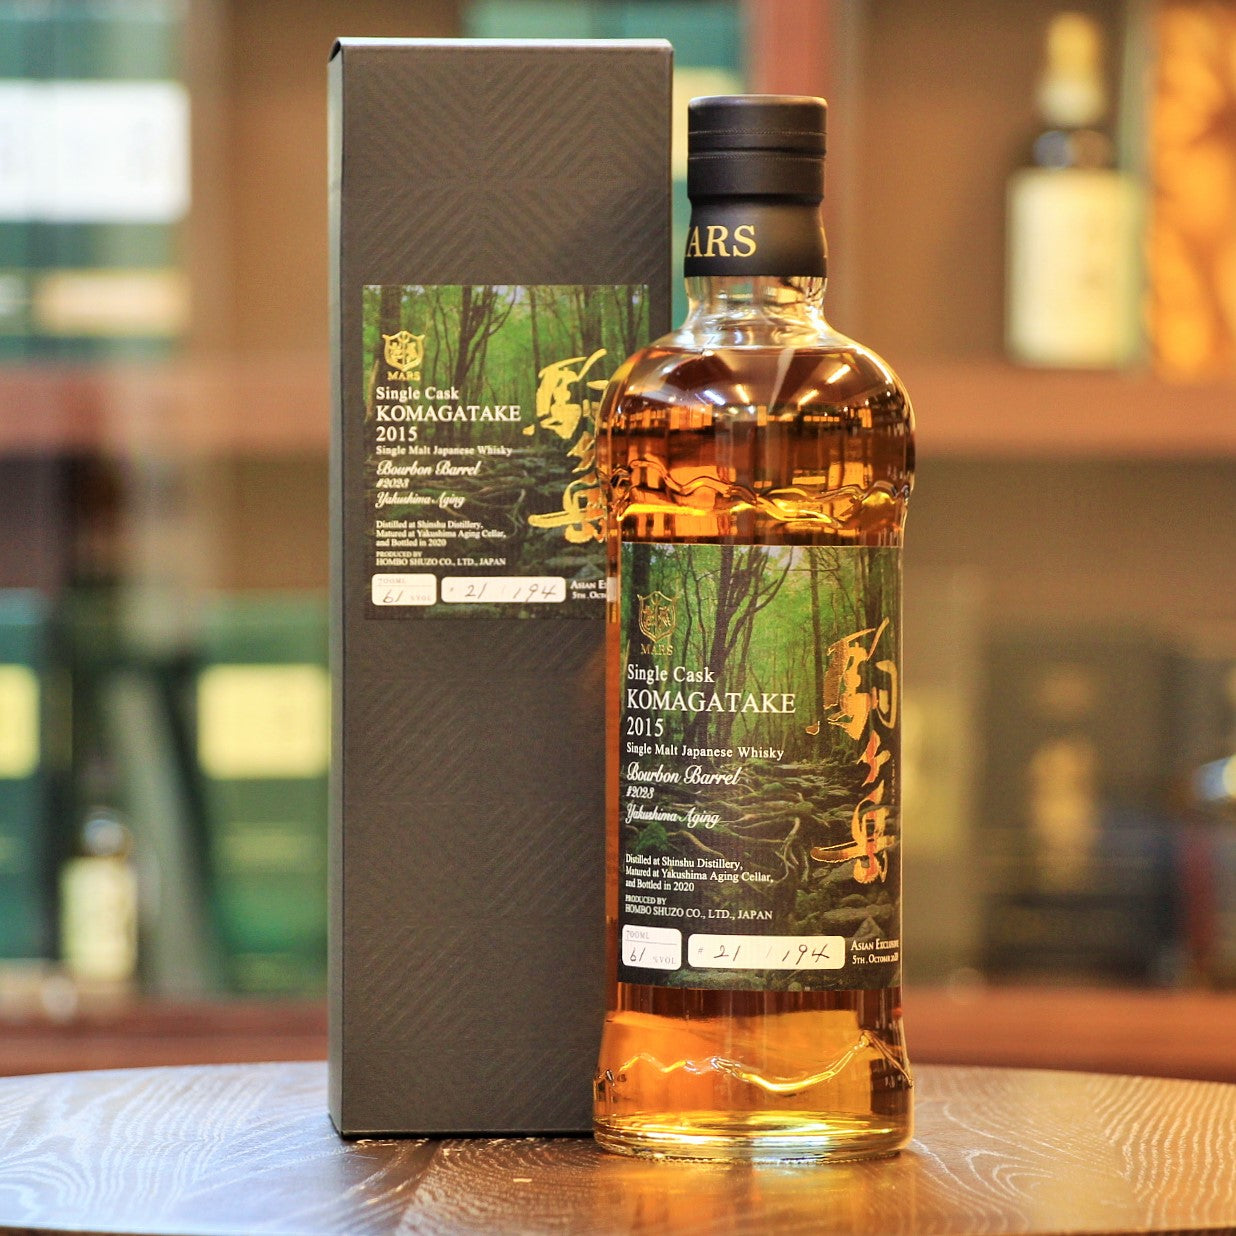 About 4 to 5 years old Single cask whisky which has been aged in bourbon barrels and matured in yakushima aging cellar imparting some beautiful flavours to this whisky.